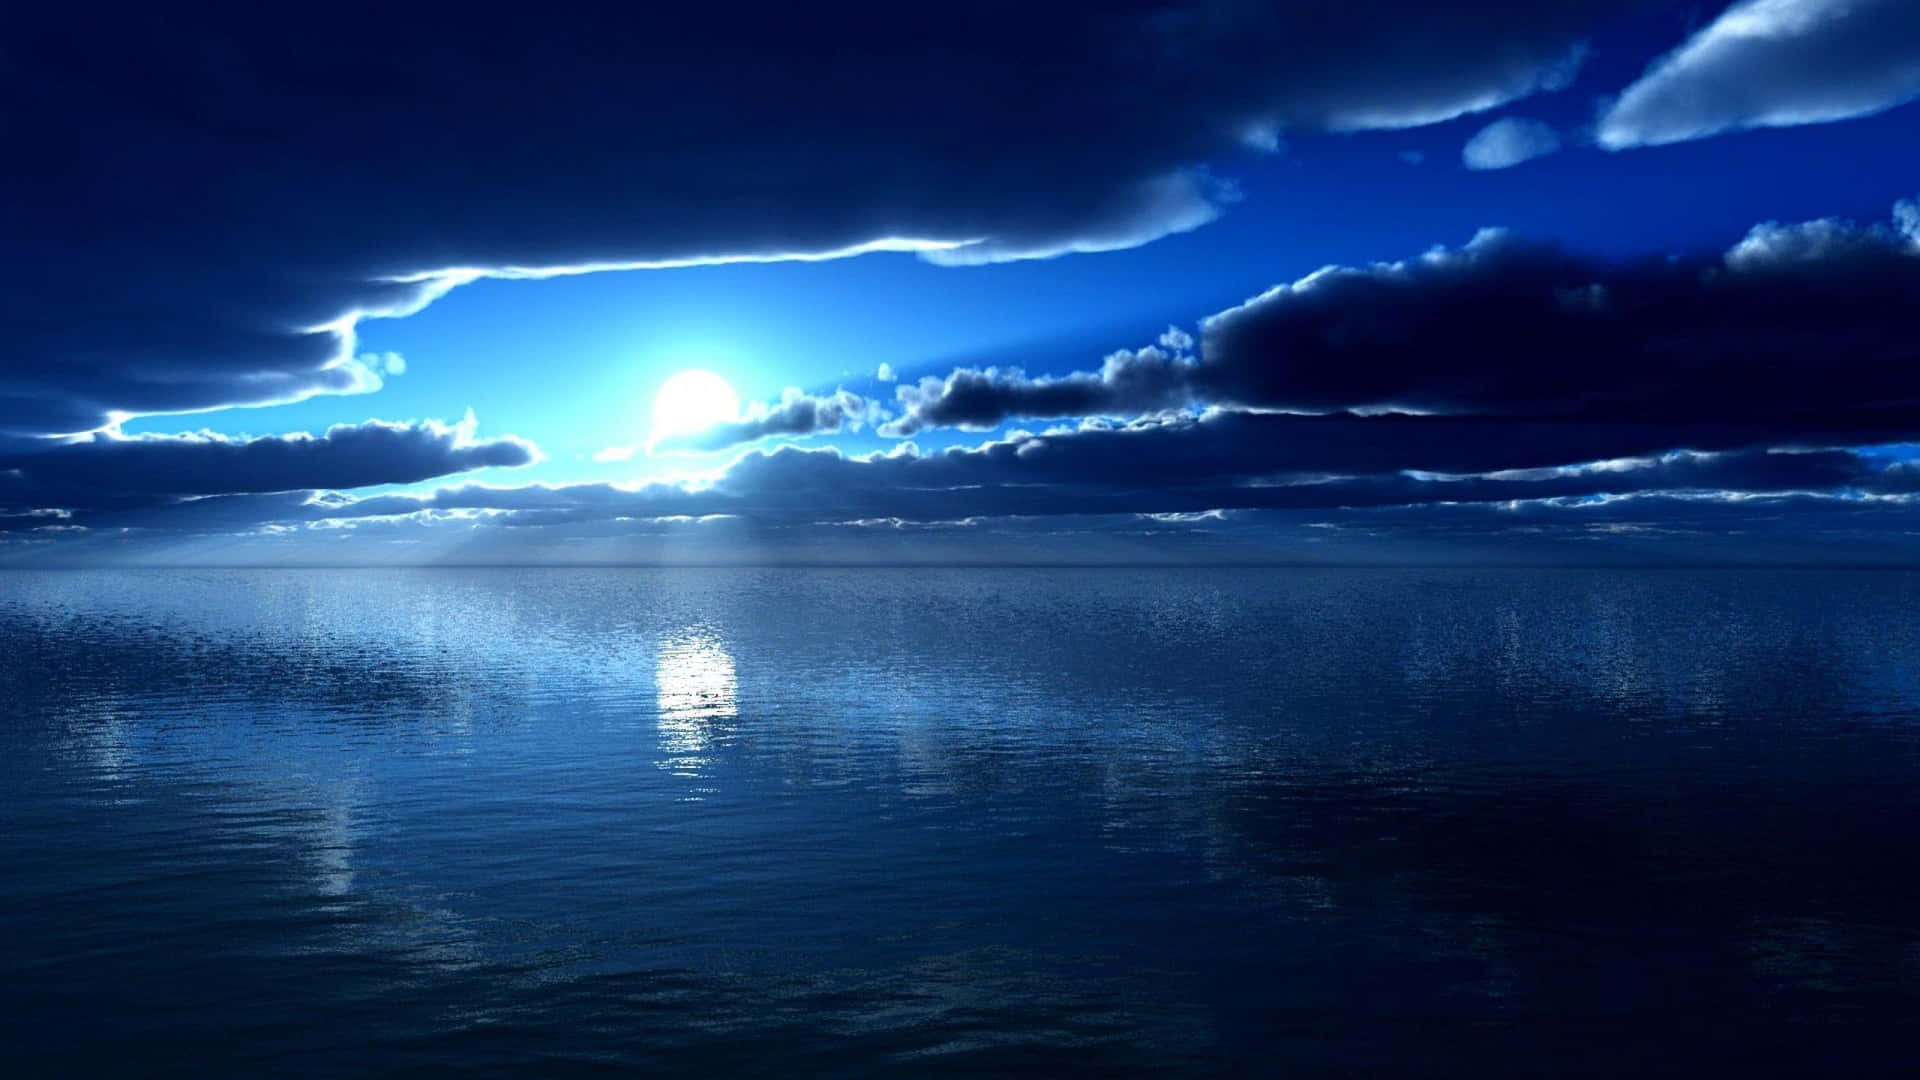 A Blue Sky With Clouds And Water